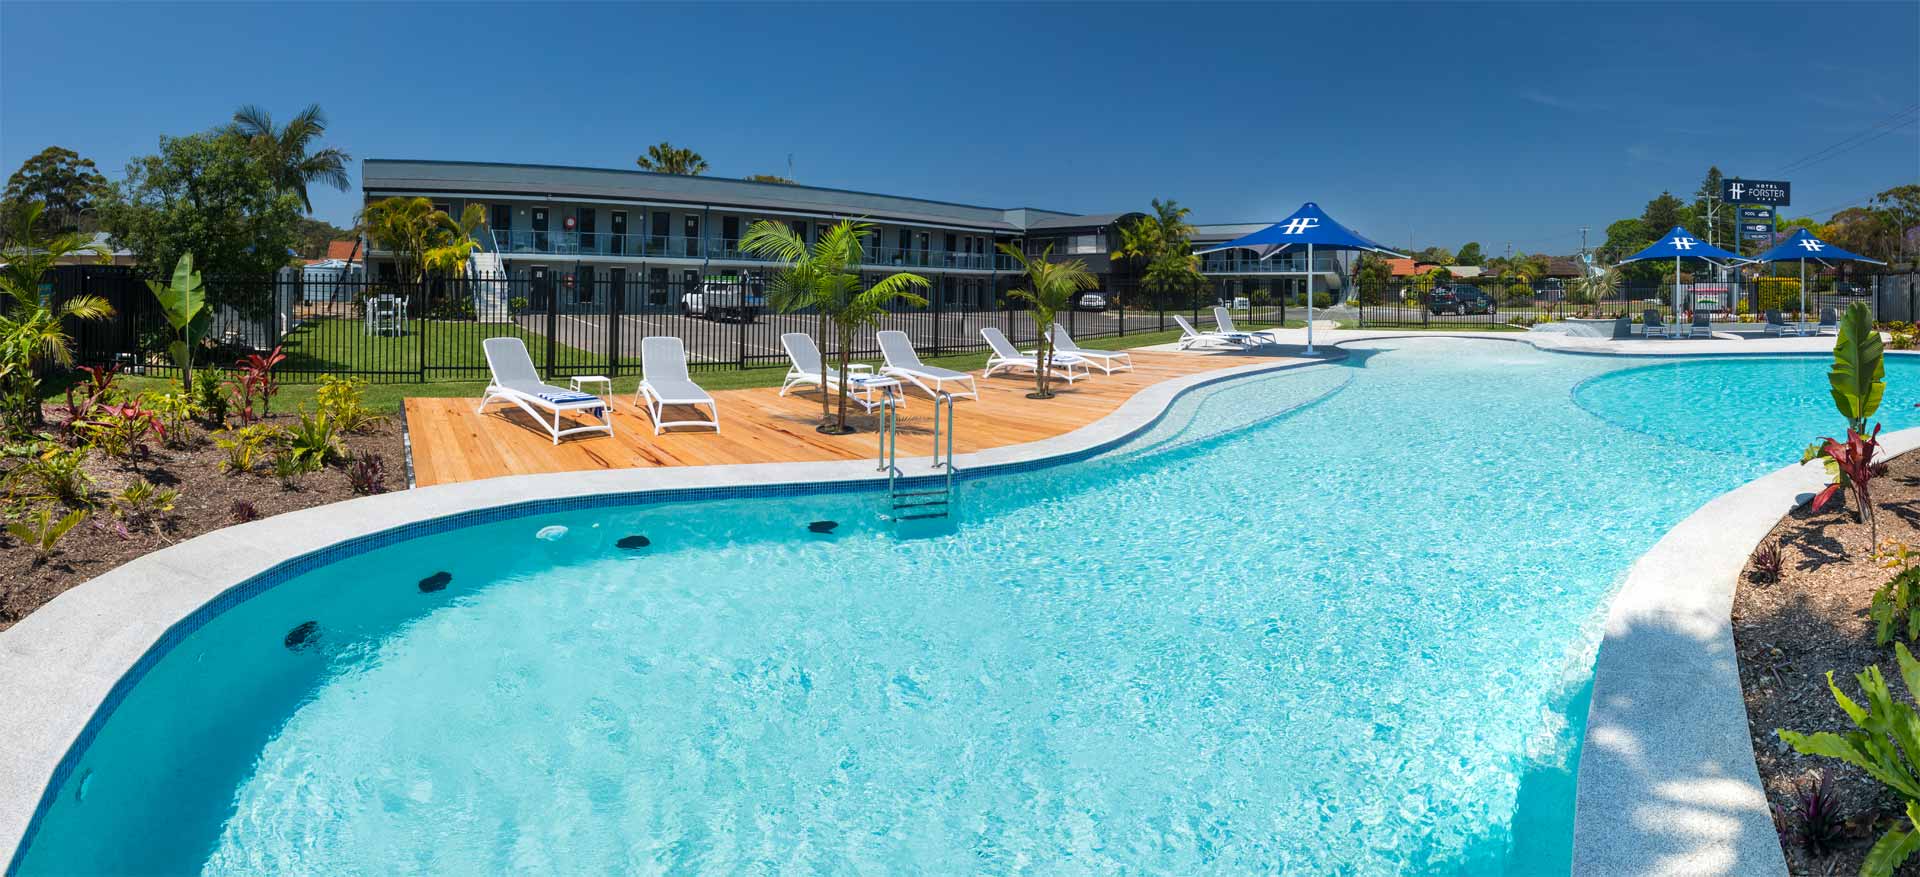 15. Hotel Forster new pool oasis